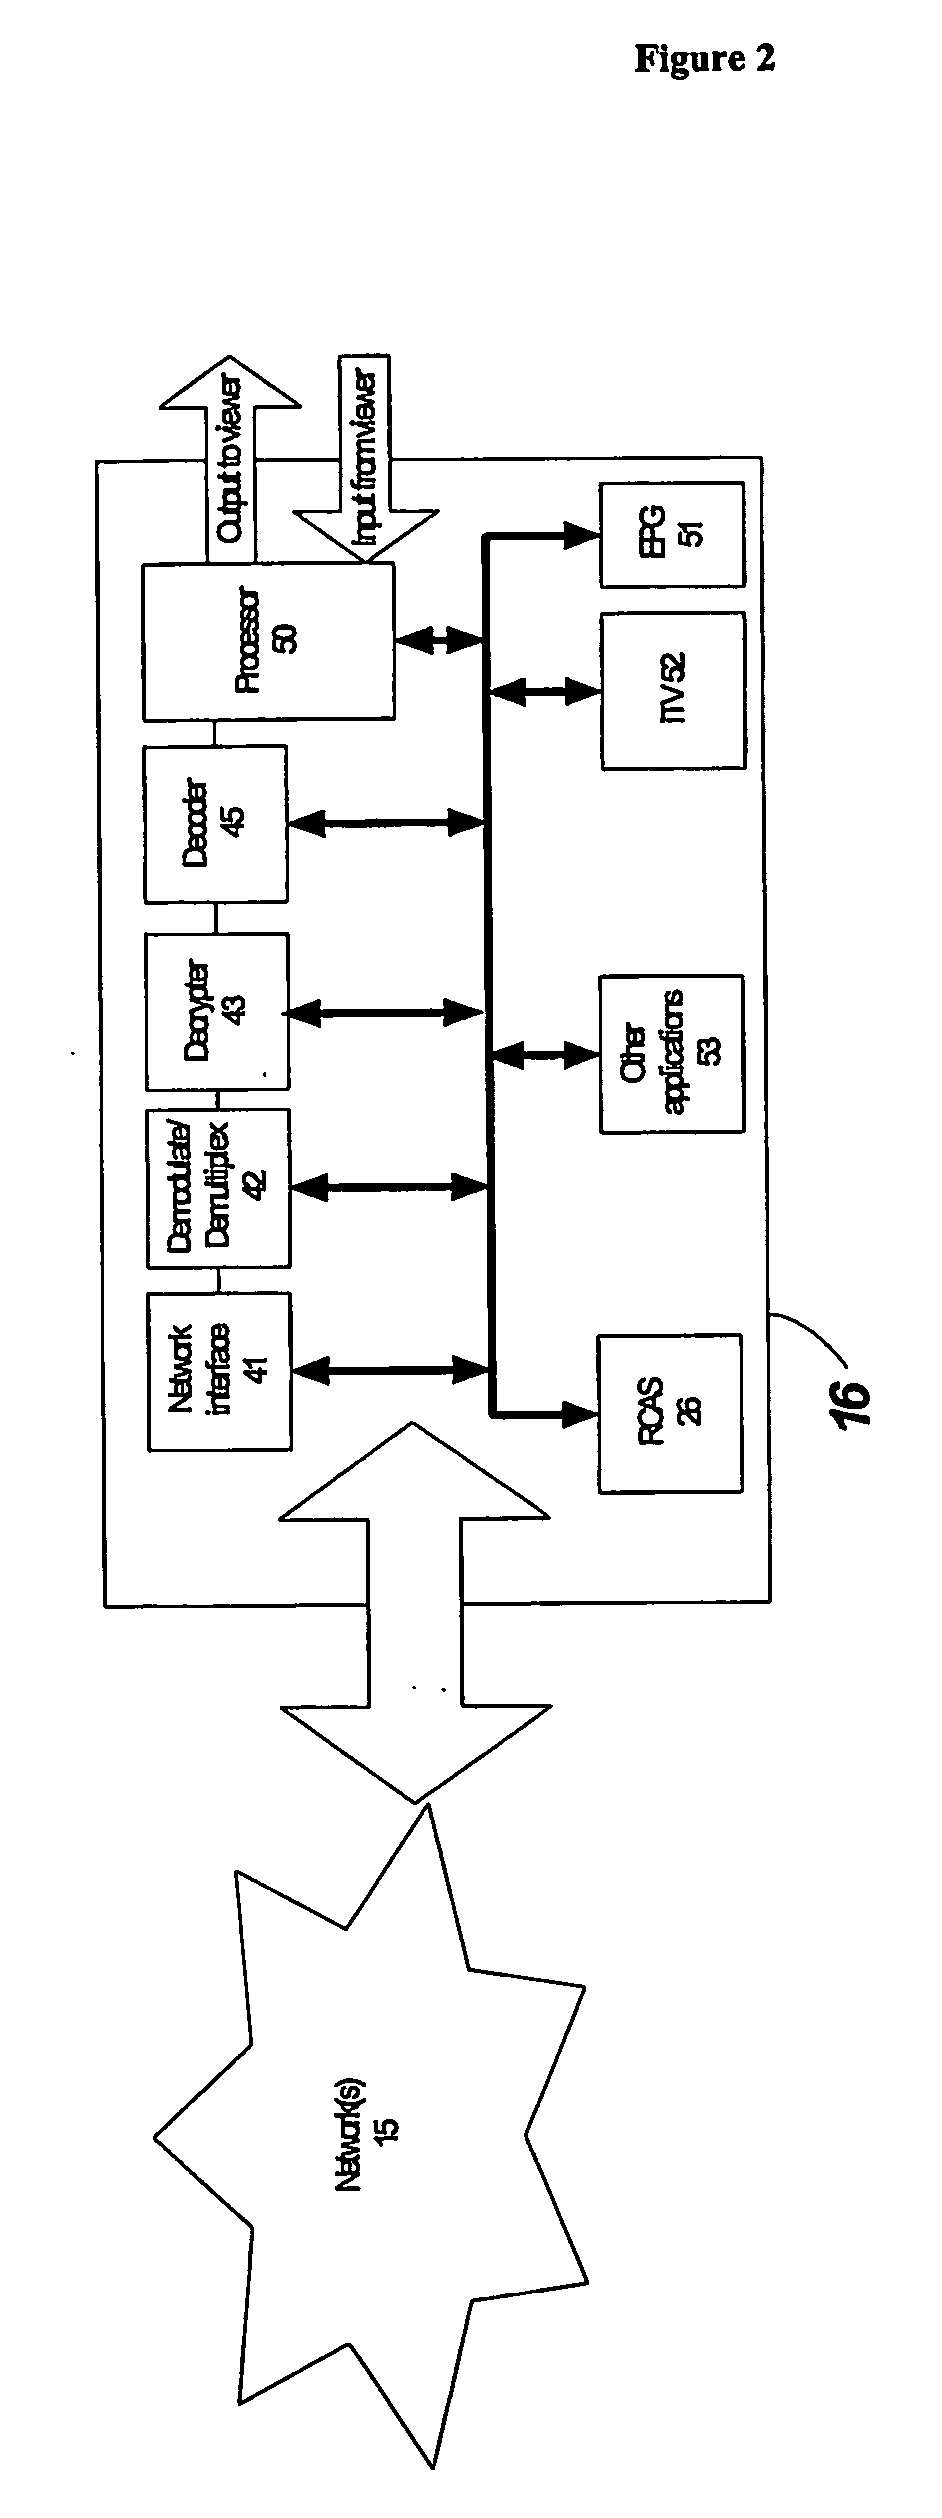 Method and system for detecting and preventing unauthorized signal usage in a content delivery network